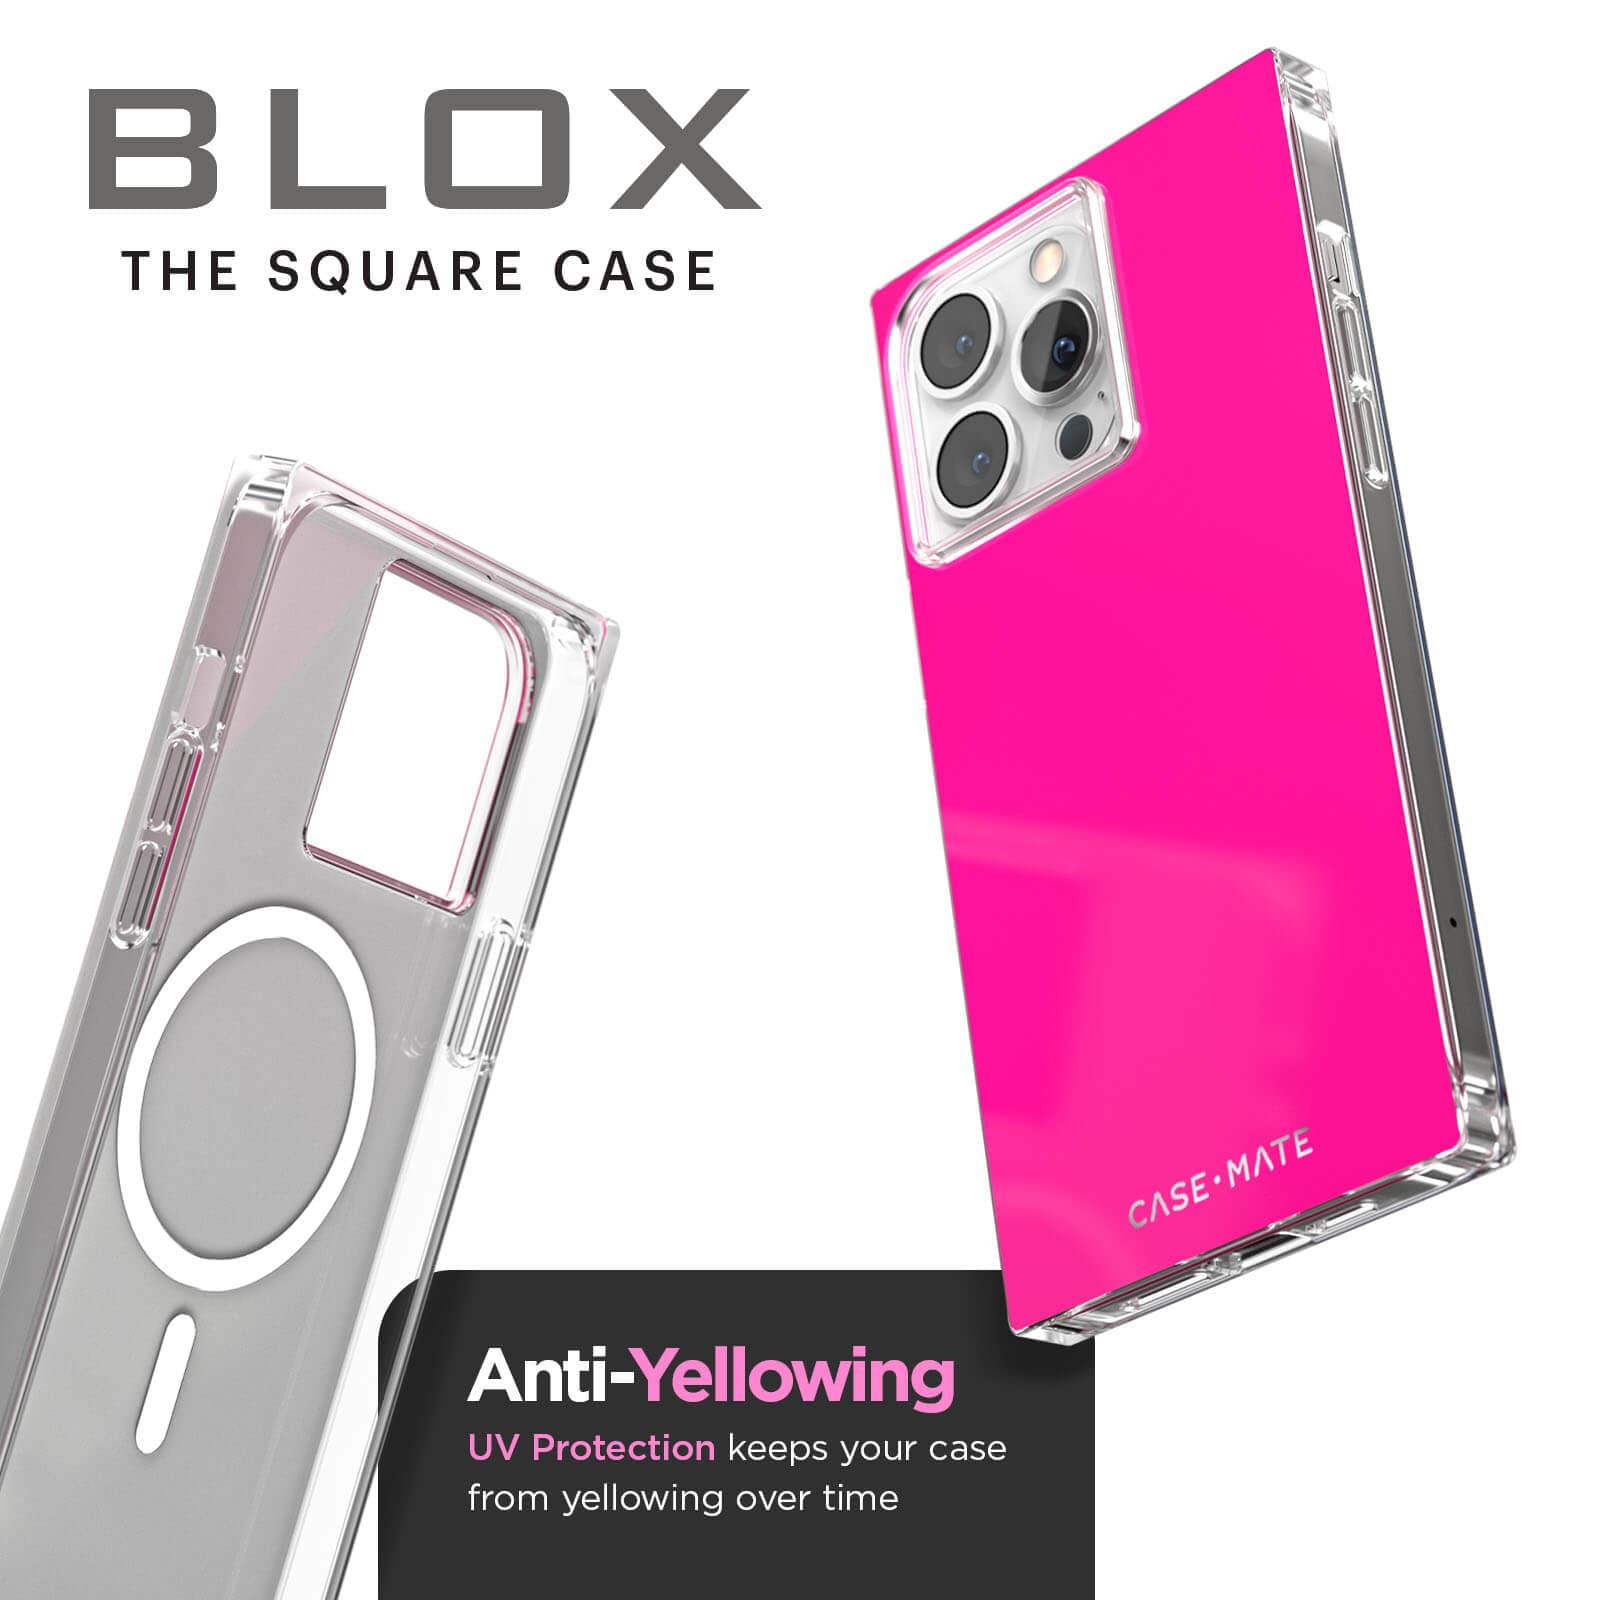 BLOX The Square Case. Anti-yellowing UV protection keeps your case from yellowing over time. color::Hot Pink